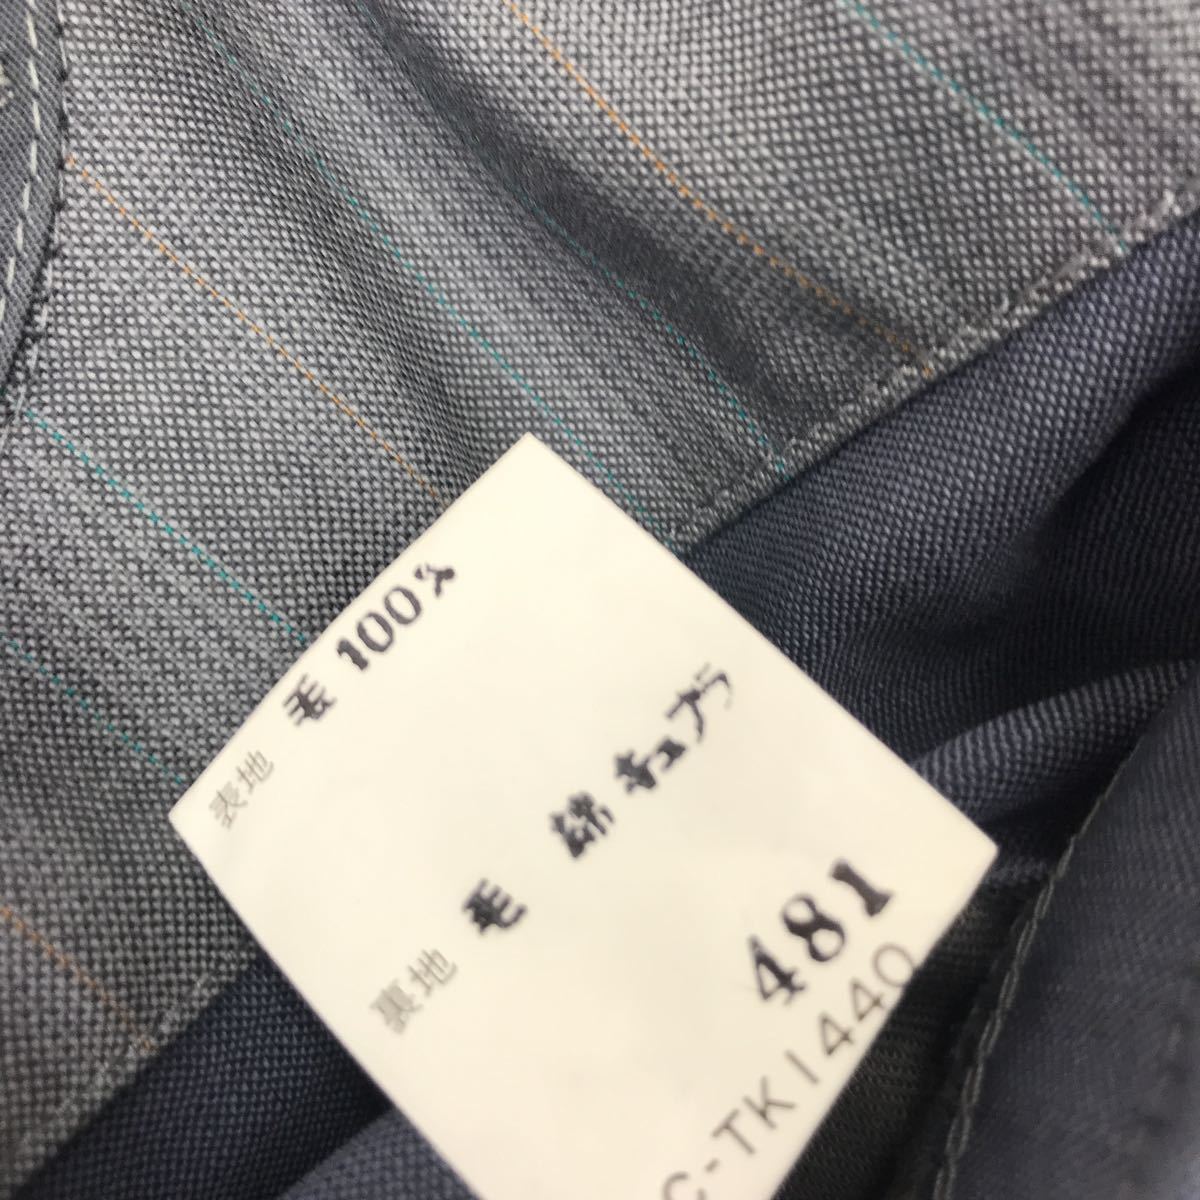  new goods * tag attaching with translation high class KING.G made in Japan Vintage double-breasted suit setup / size A7 powder blue group alternator -to stripe / wool 100%